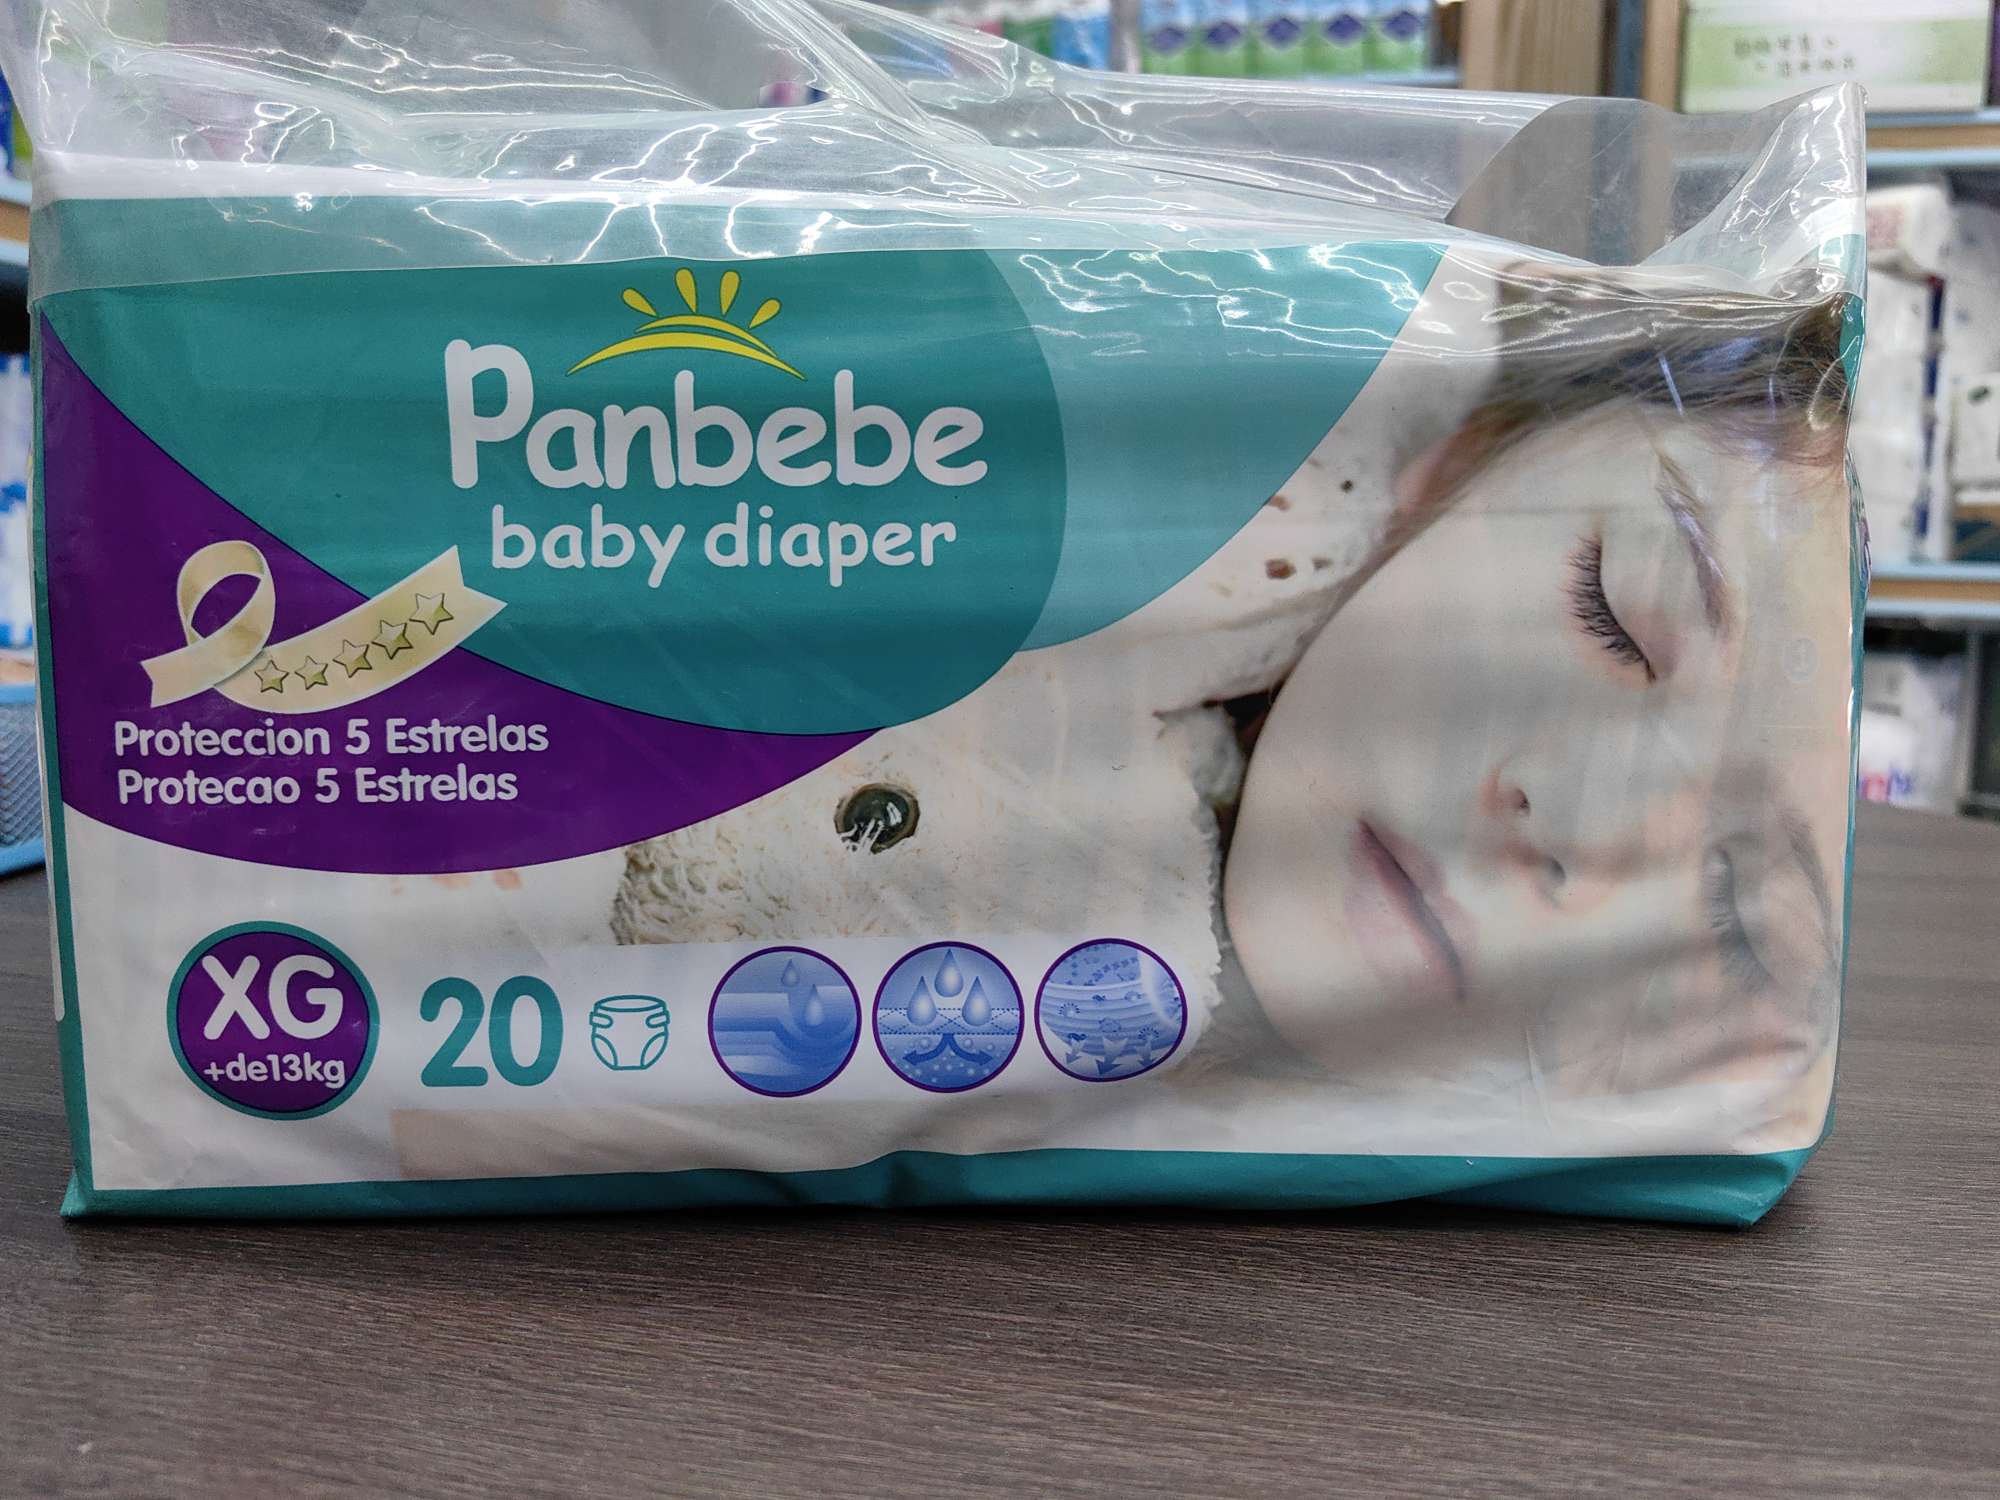 Baby diapers./20pcs详情图5